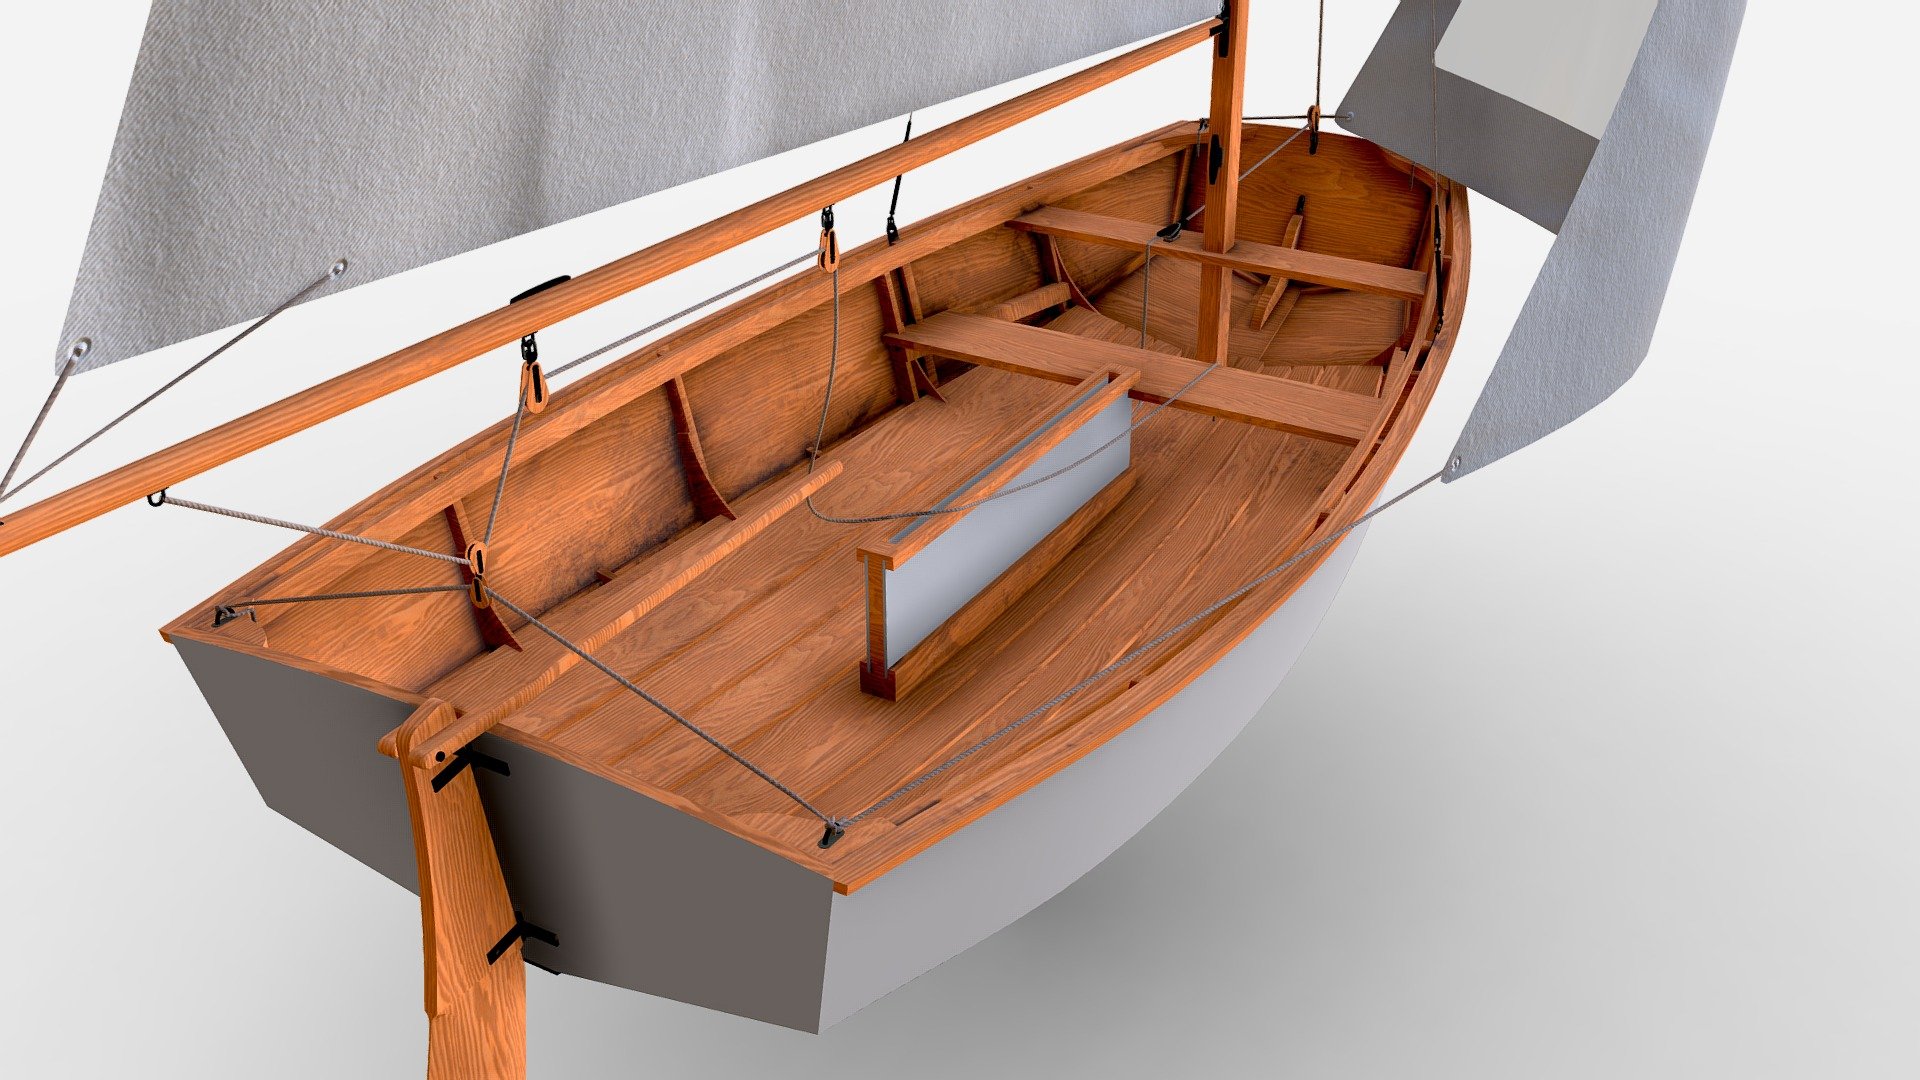 The Pram is a durable, self-bailing dinghy that is a perfect training boat for beginner sailors.
Model of a small sailing boat.
Each sail can be removed
Model formats:
.max (3ds Max 2016 VRay)
.blender
.fbx (Multi Format)
.obj (Multi Format)
*.ma (Maya 2018)
Fits well for close up renders - Pram Sailboat - Buy Royalty Free 3D model by IgYerm (@IgorYerm) 3d model